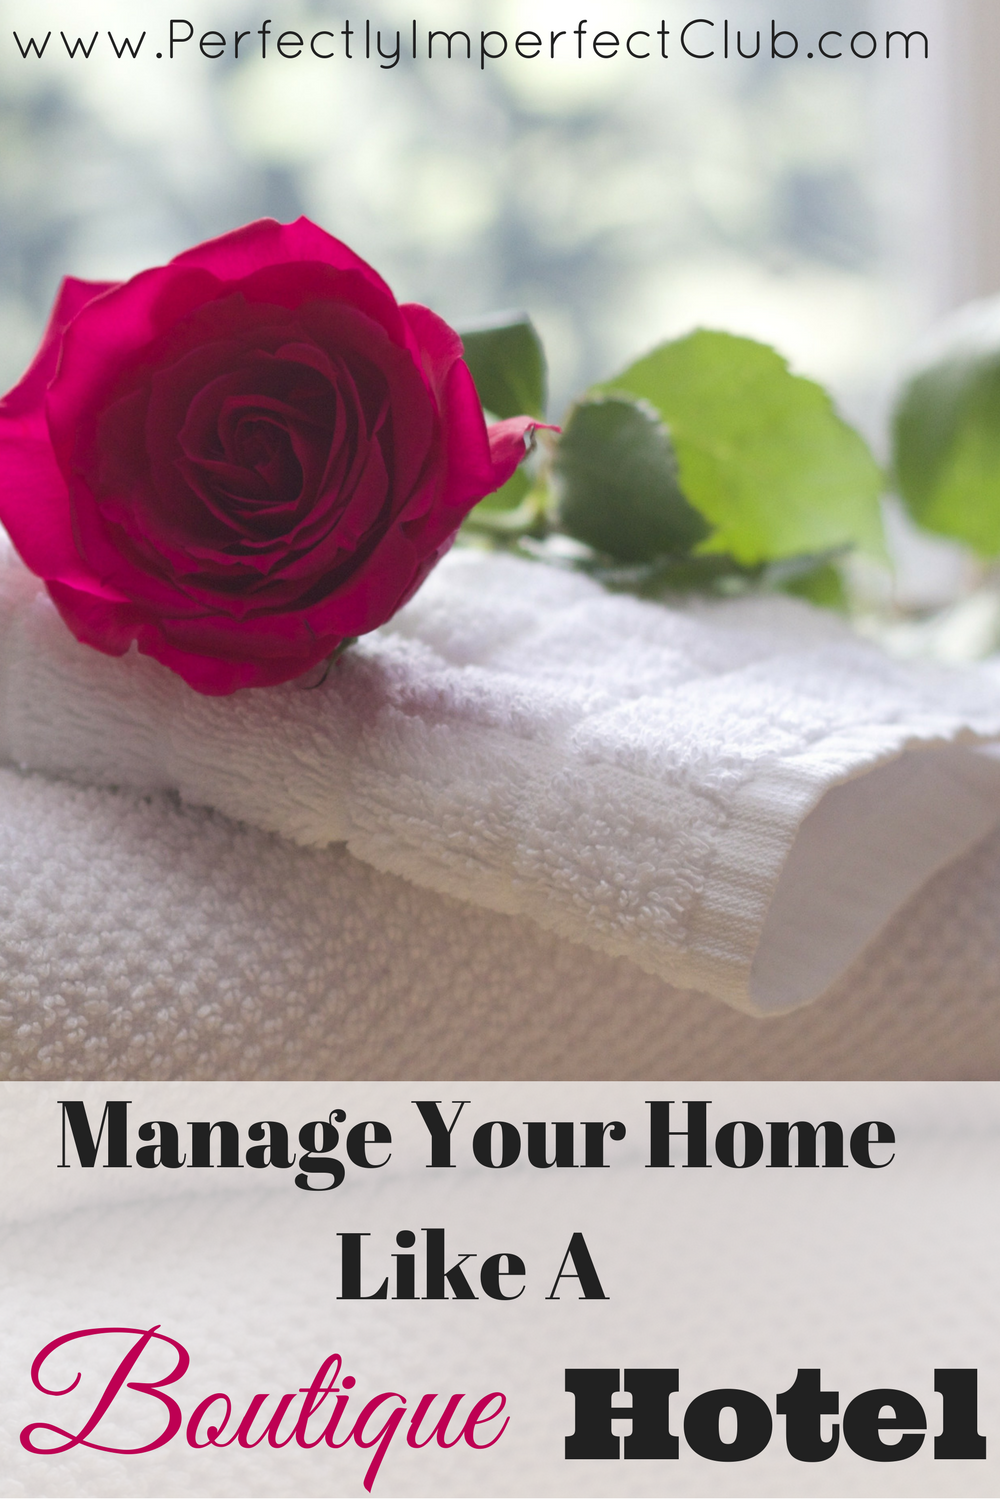 A great housekeeping hack to inspire and motivate your homemaking efforts.